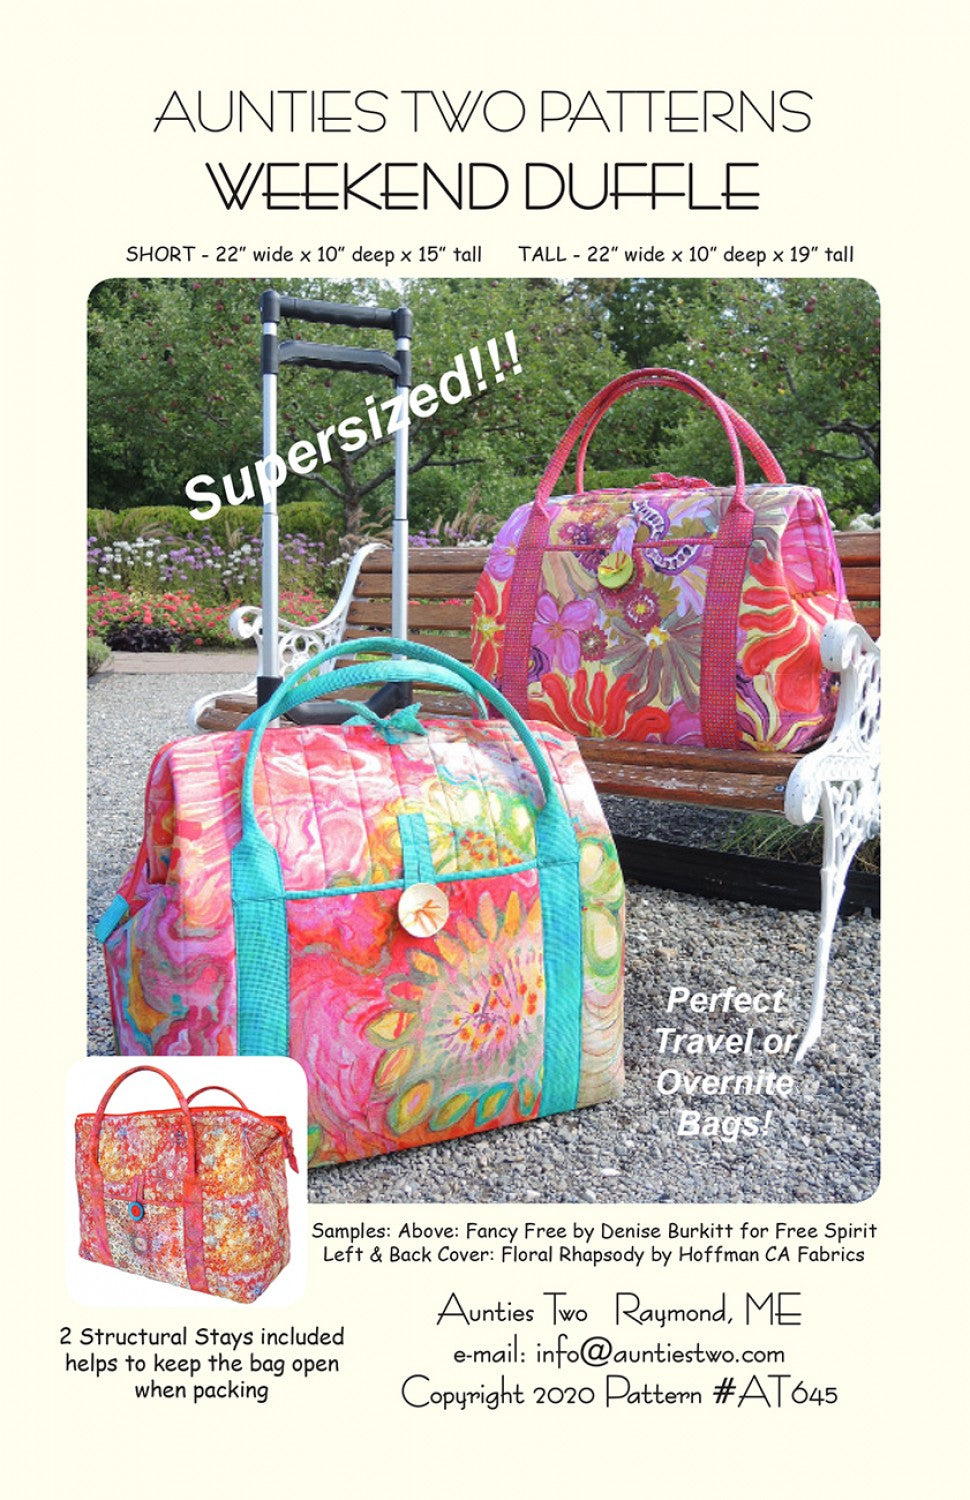 Weekend Duffle Patterns – Quilting Books Patterns and Notions